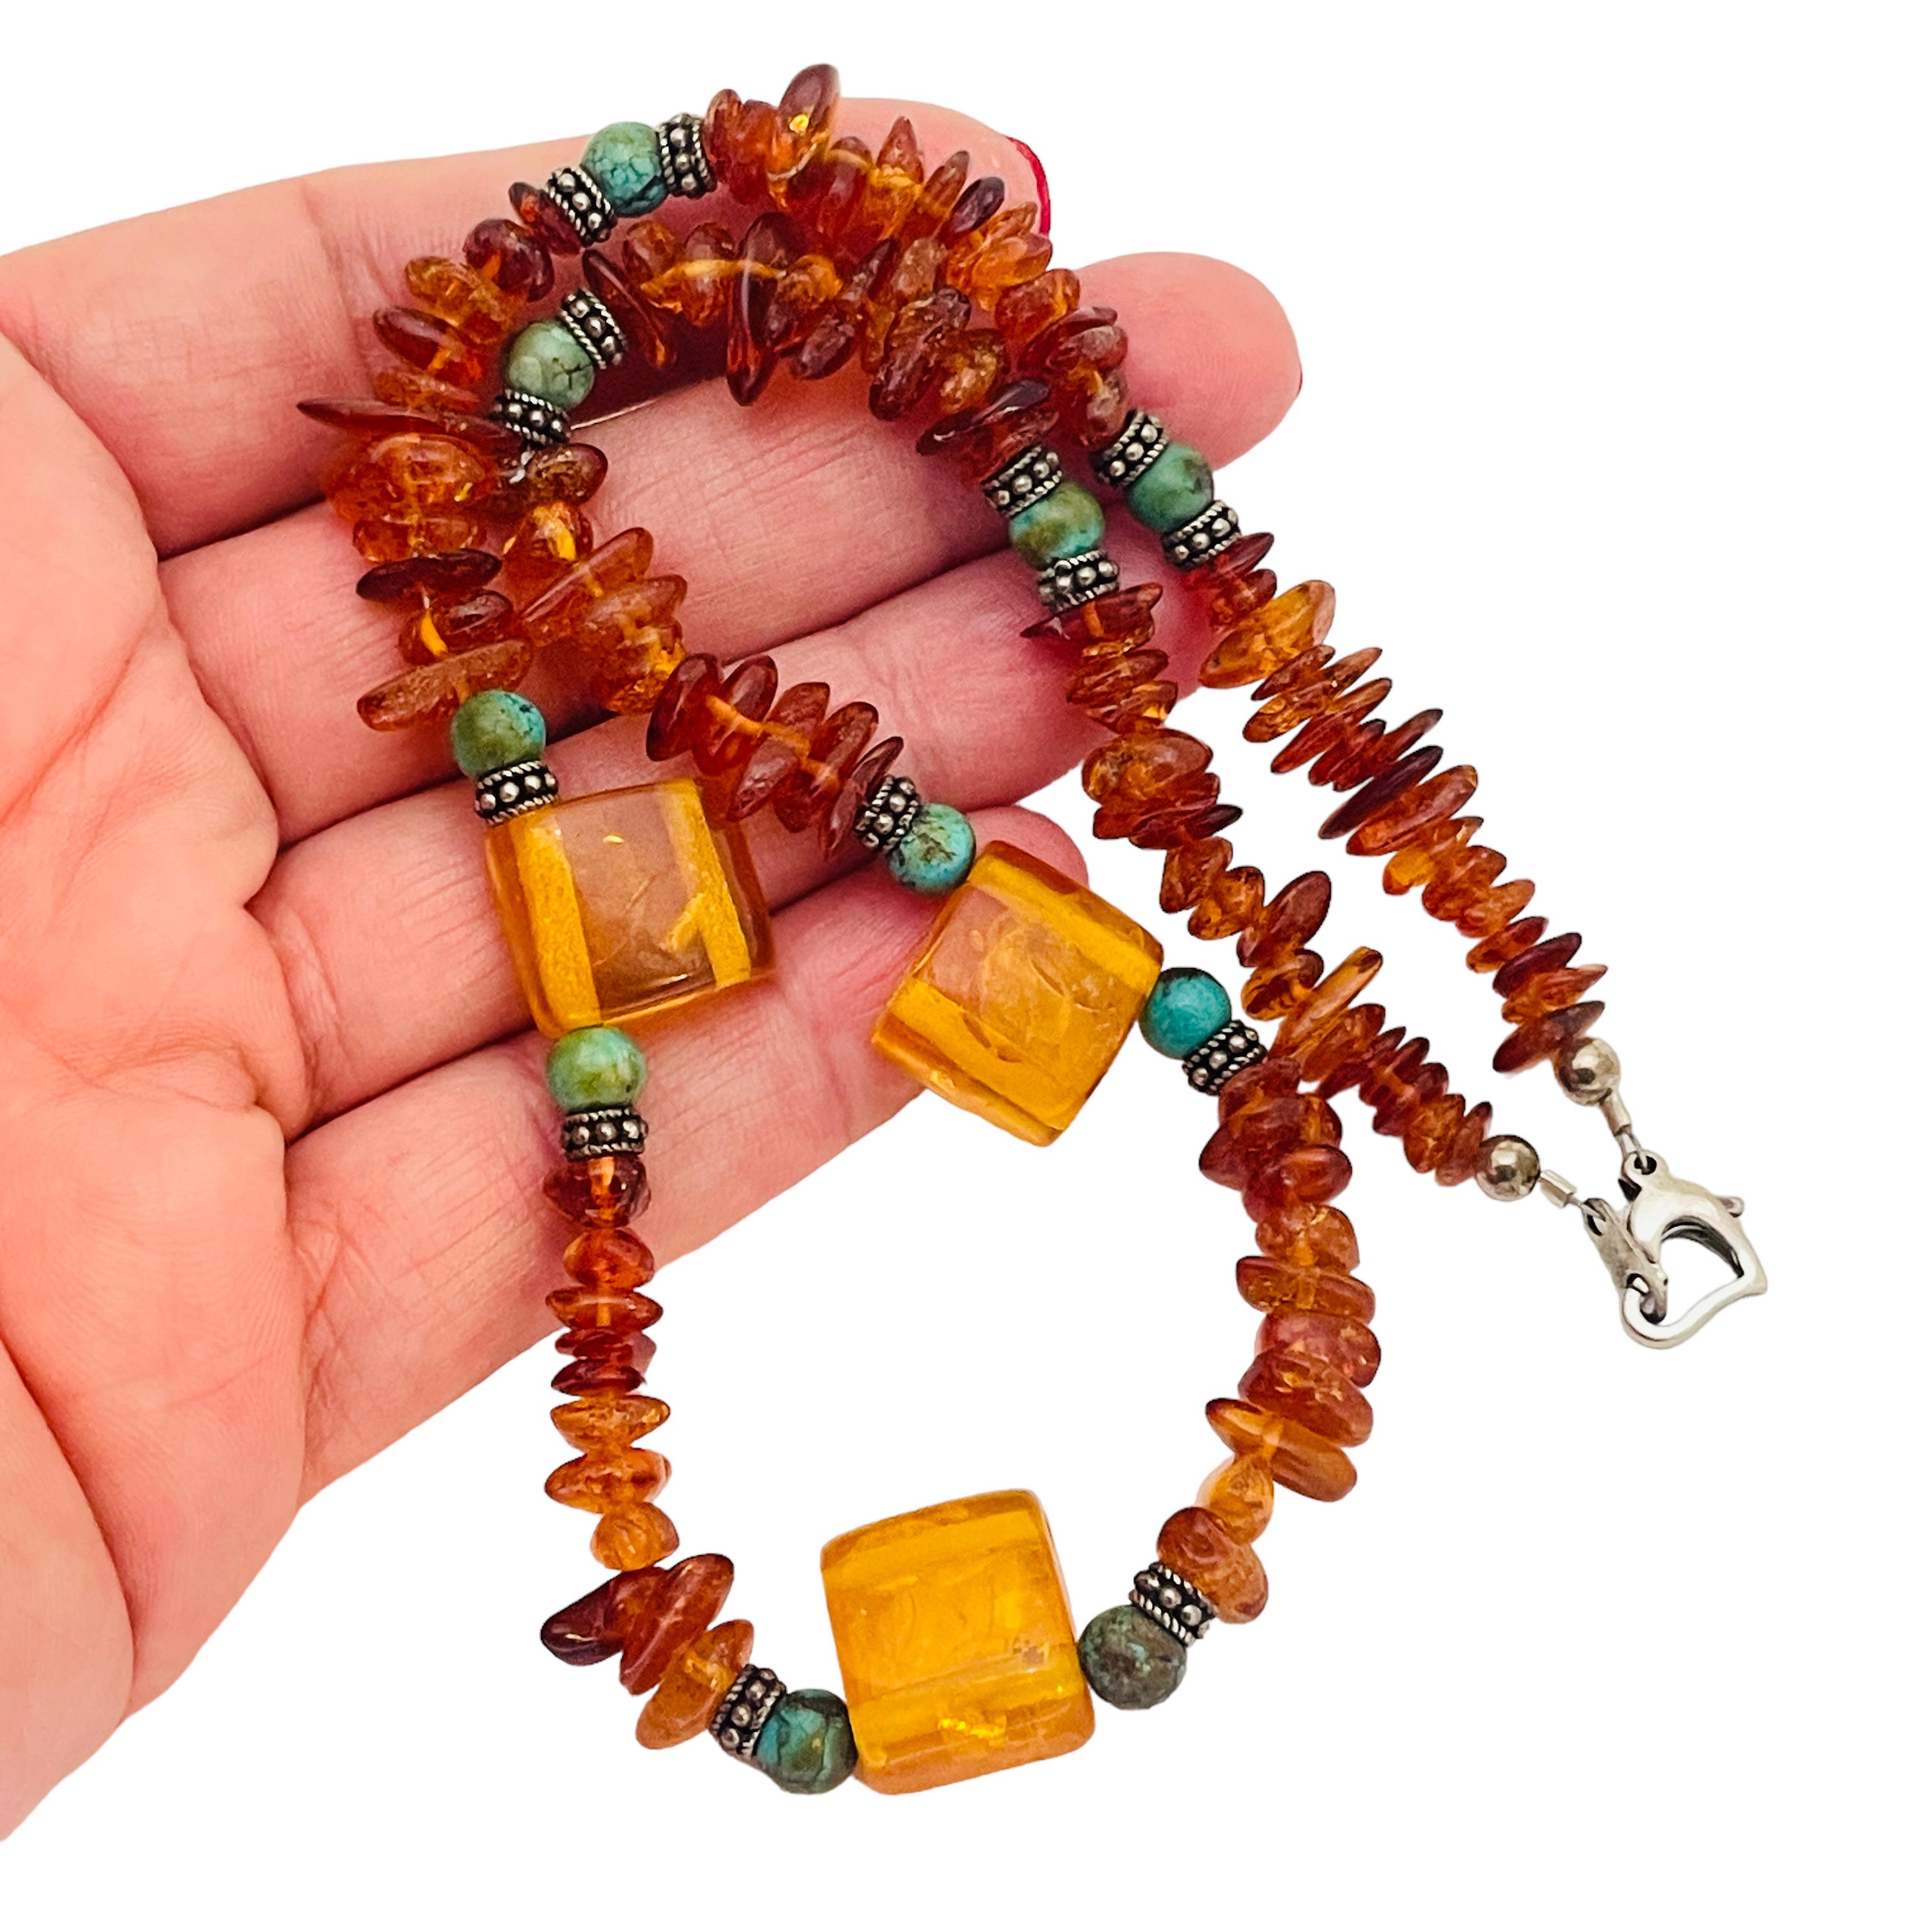 DETAILS

•  stamped 925 on clasp 

• natural amber beads

• vintage amber necklace  

MEASUREMENTS  

• 

CONDITION

•  excellent vintage condition with minimal signs of wear 

 Sku 35